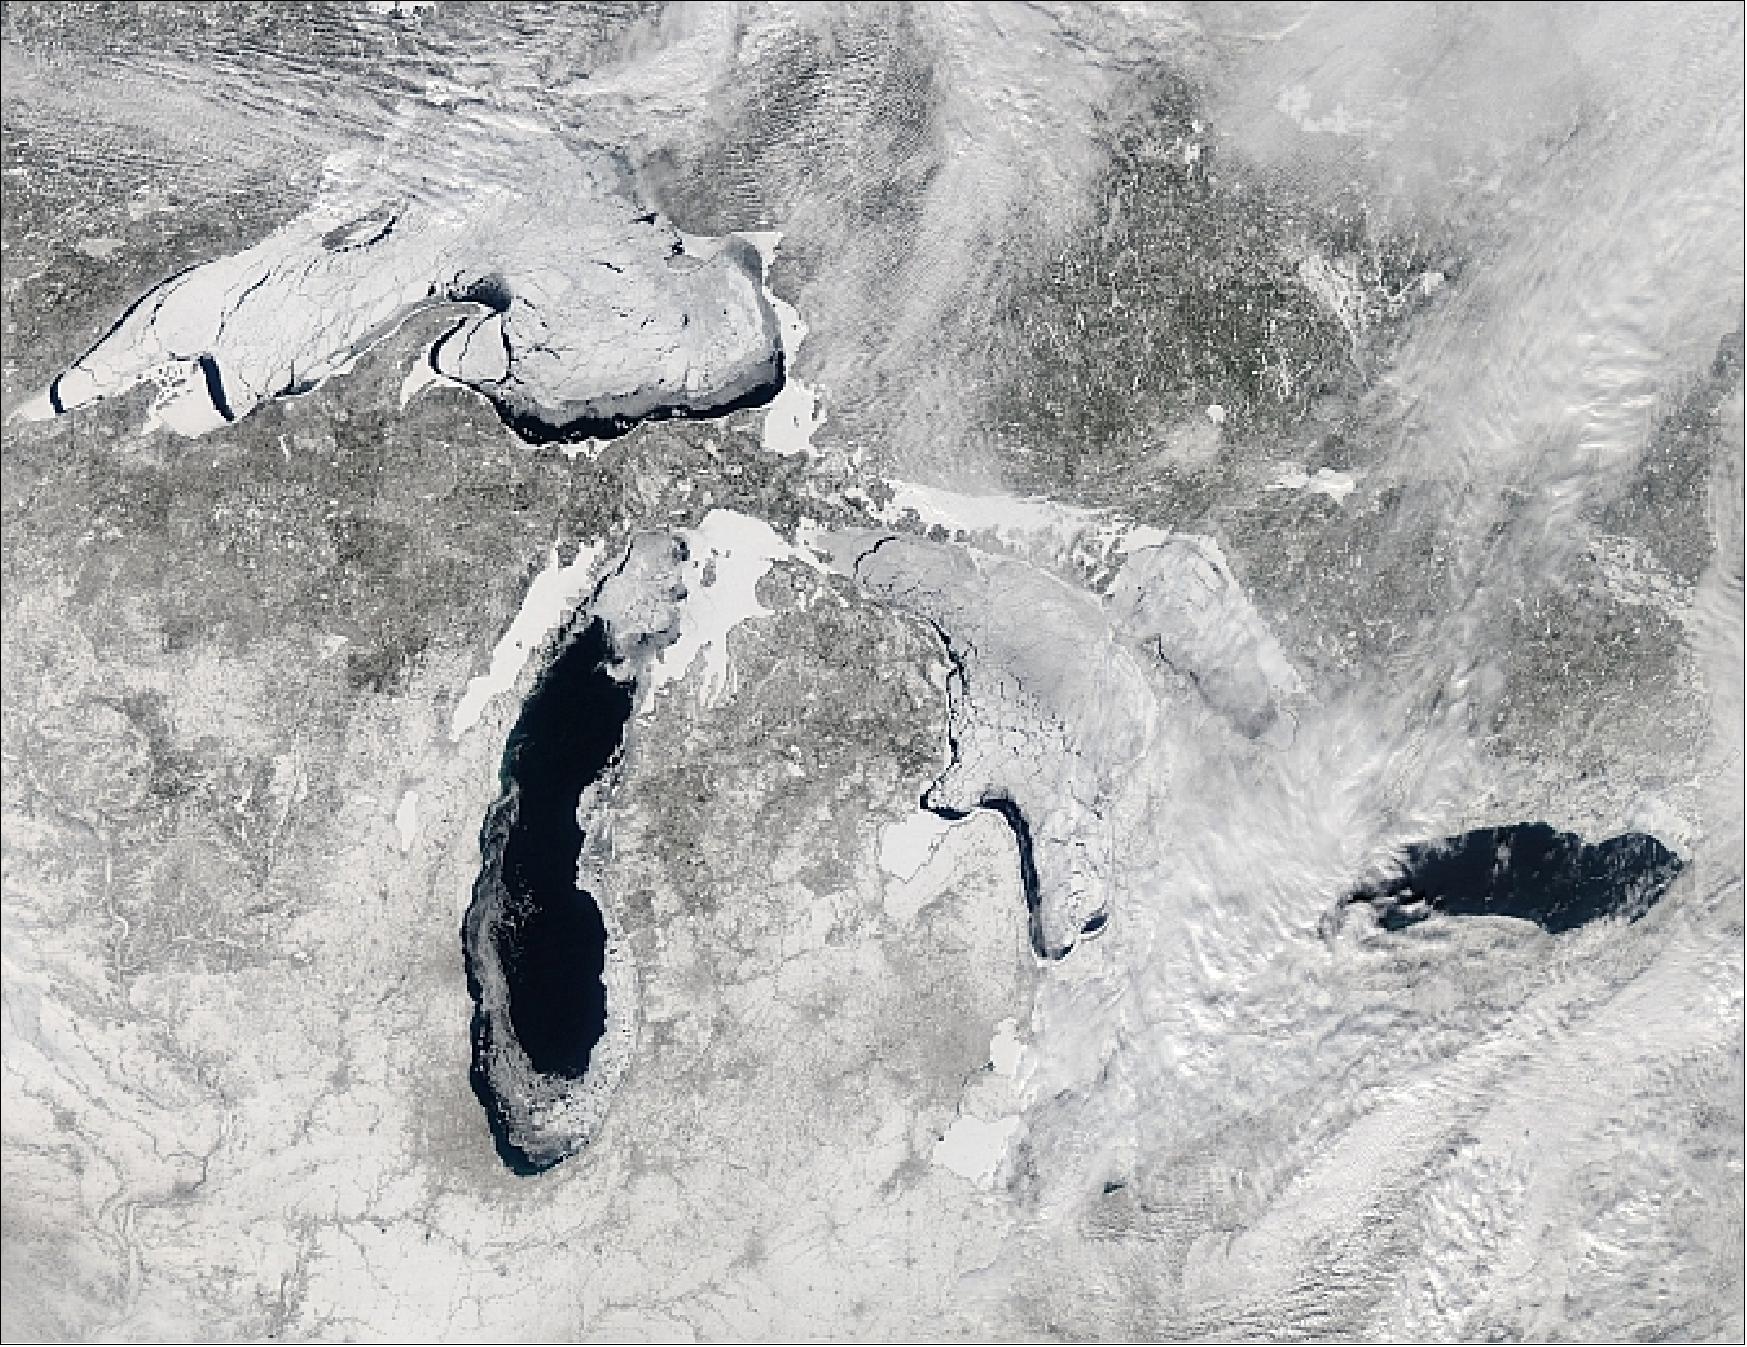 Figure 131: This image, acquired with MODIS on the Aqua satellite, shows the Great Lakes on Feb. 19, 2014, when ice covered 80.3% of the lakes (image credit: Jeff Schmaltz, LANCE/EOSDIS MODIS Rapid Response Team, NASA)